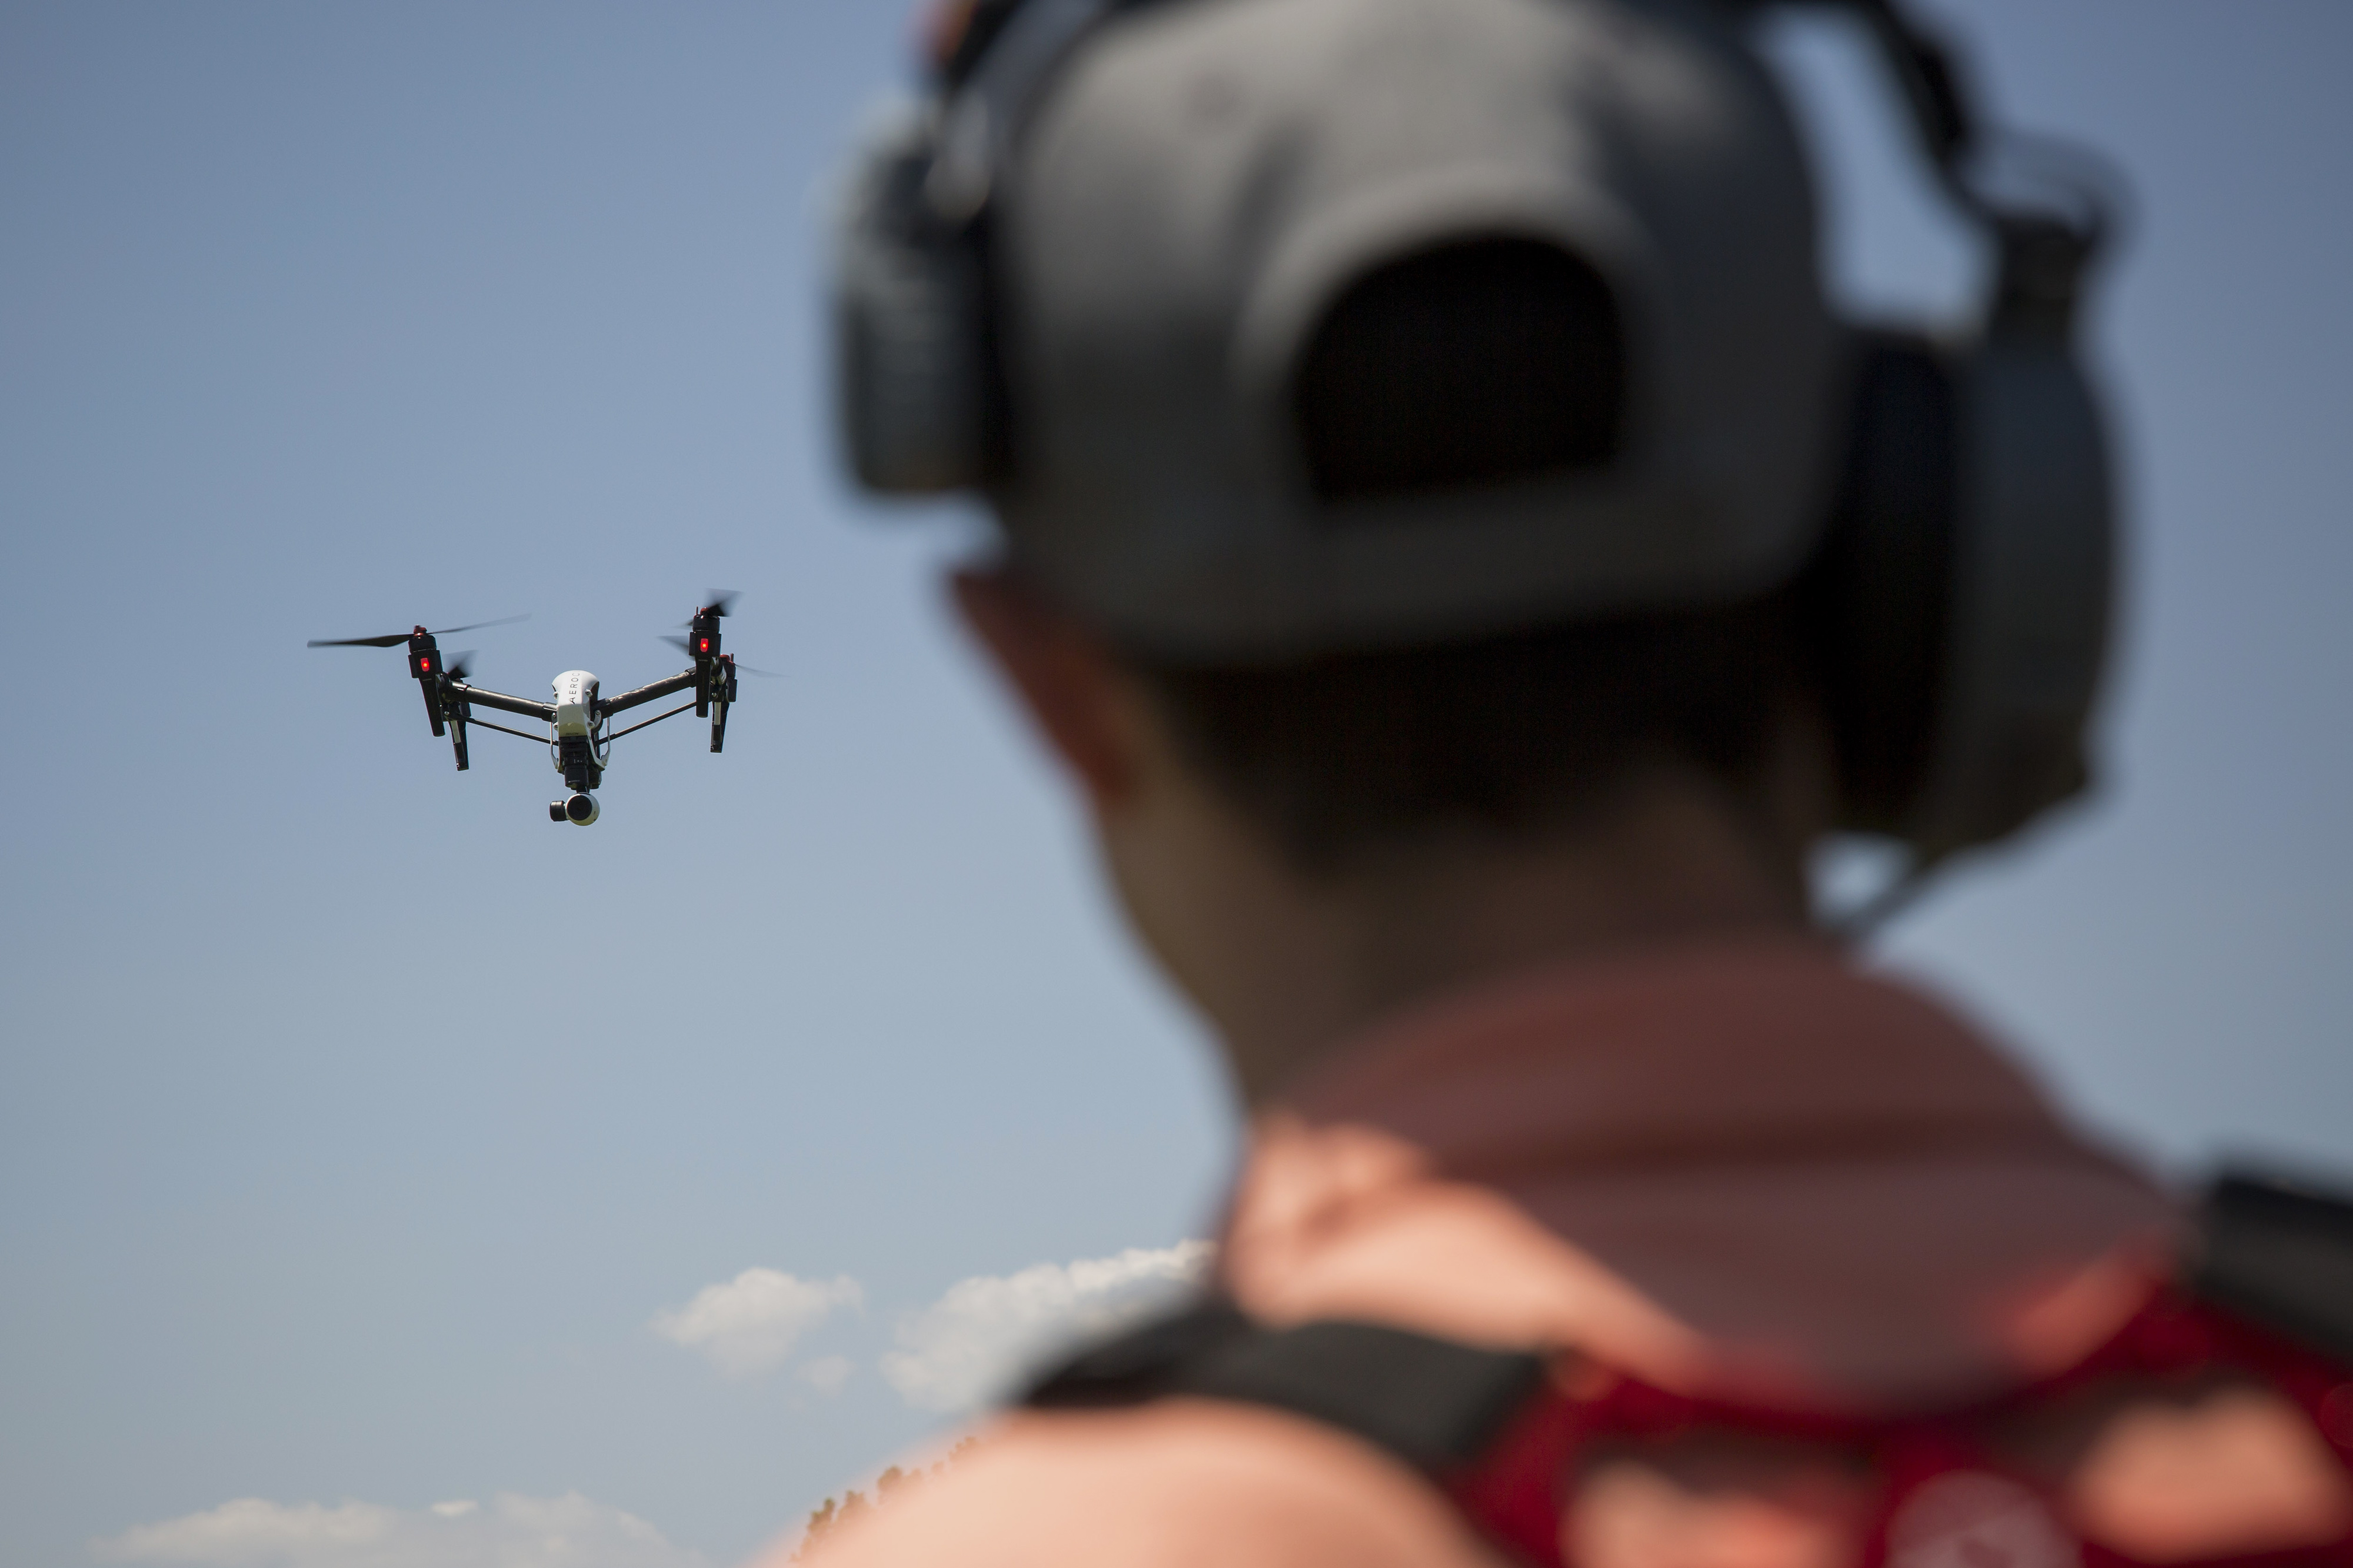 Drone Funding Spikes As Commercial Craft Take Flight, Earn Money